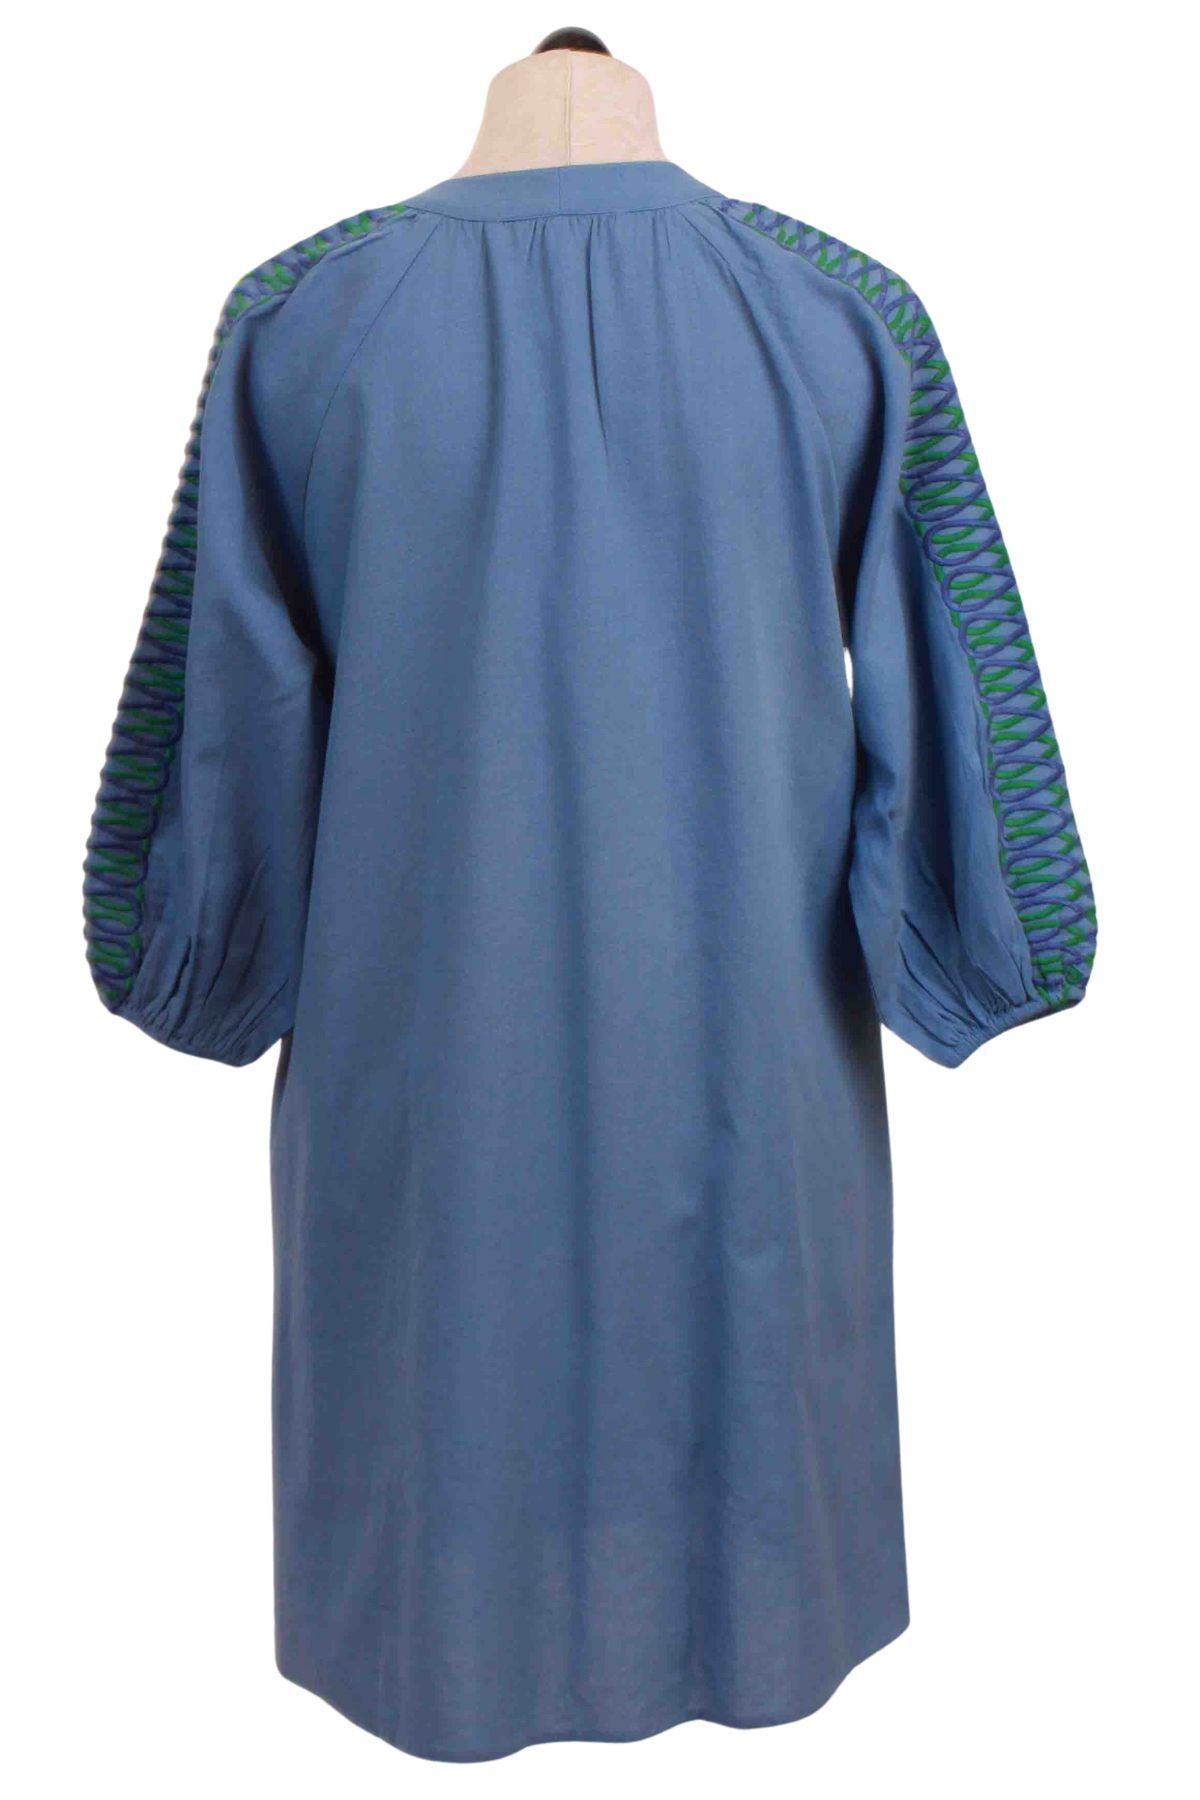 back view of Blue/Green Hailey Embroidered Dress by Valerie Khalfon